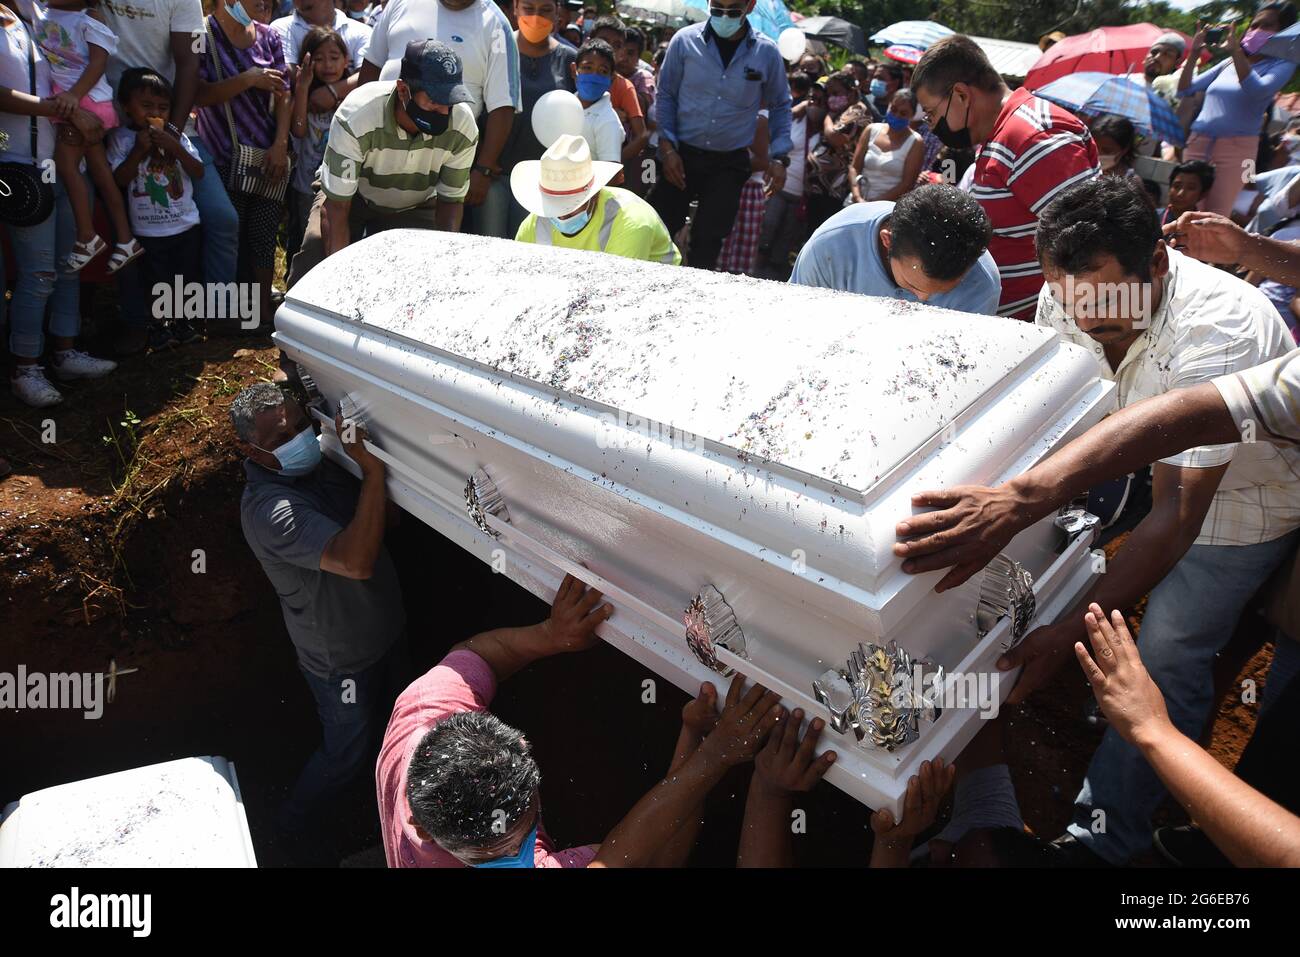 Mexico. 4th July, 2021. Relatives and hundreds of residents of Jonathan Herrera and Eduardo Aaguilar, young adolescents from Amatlan Veracruz, carry out the funeral to dismiss them after they were killed by elements of the Civil Force. Credit: Hector Adolfo Quintanar Perez/ZUMA Wire/Alamy Live News Stock Photo